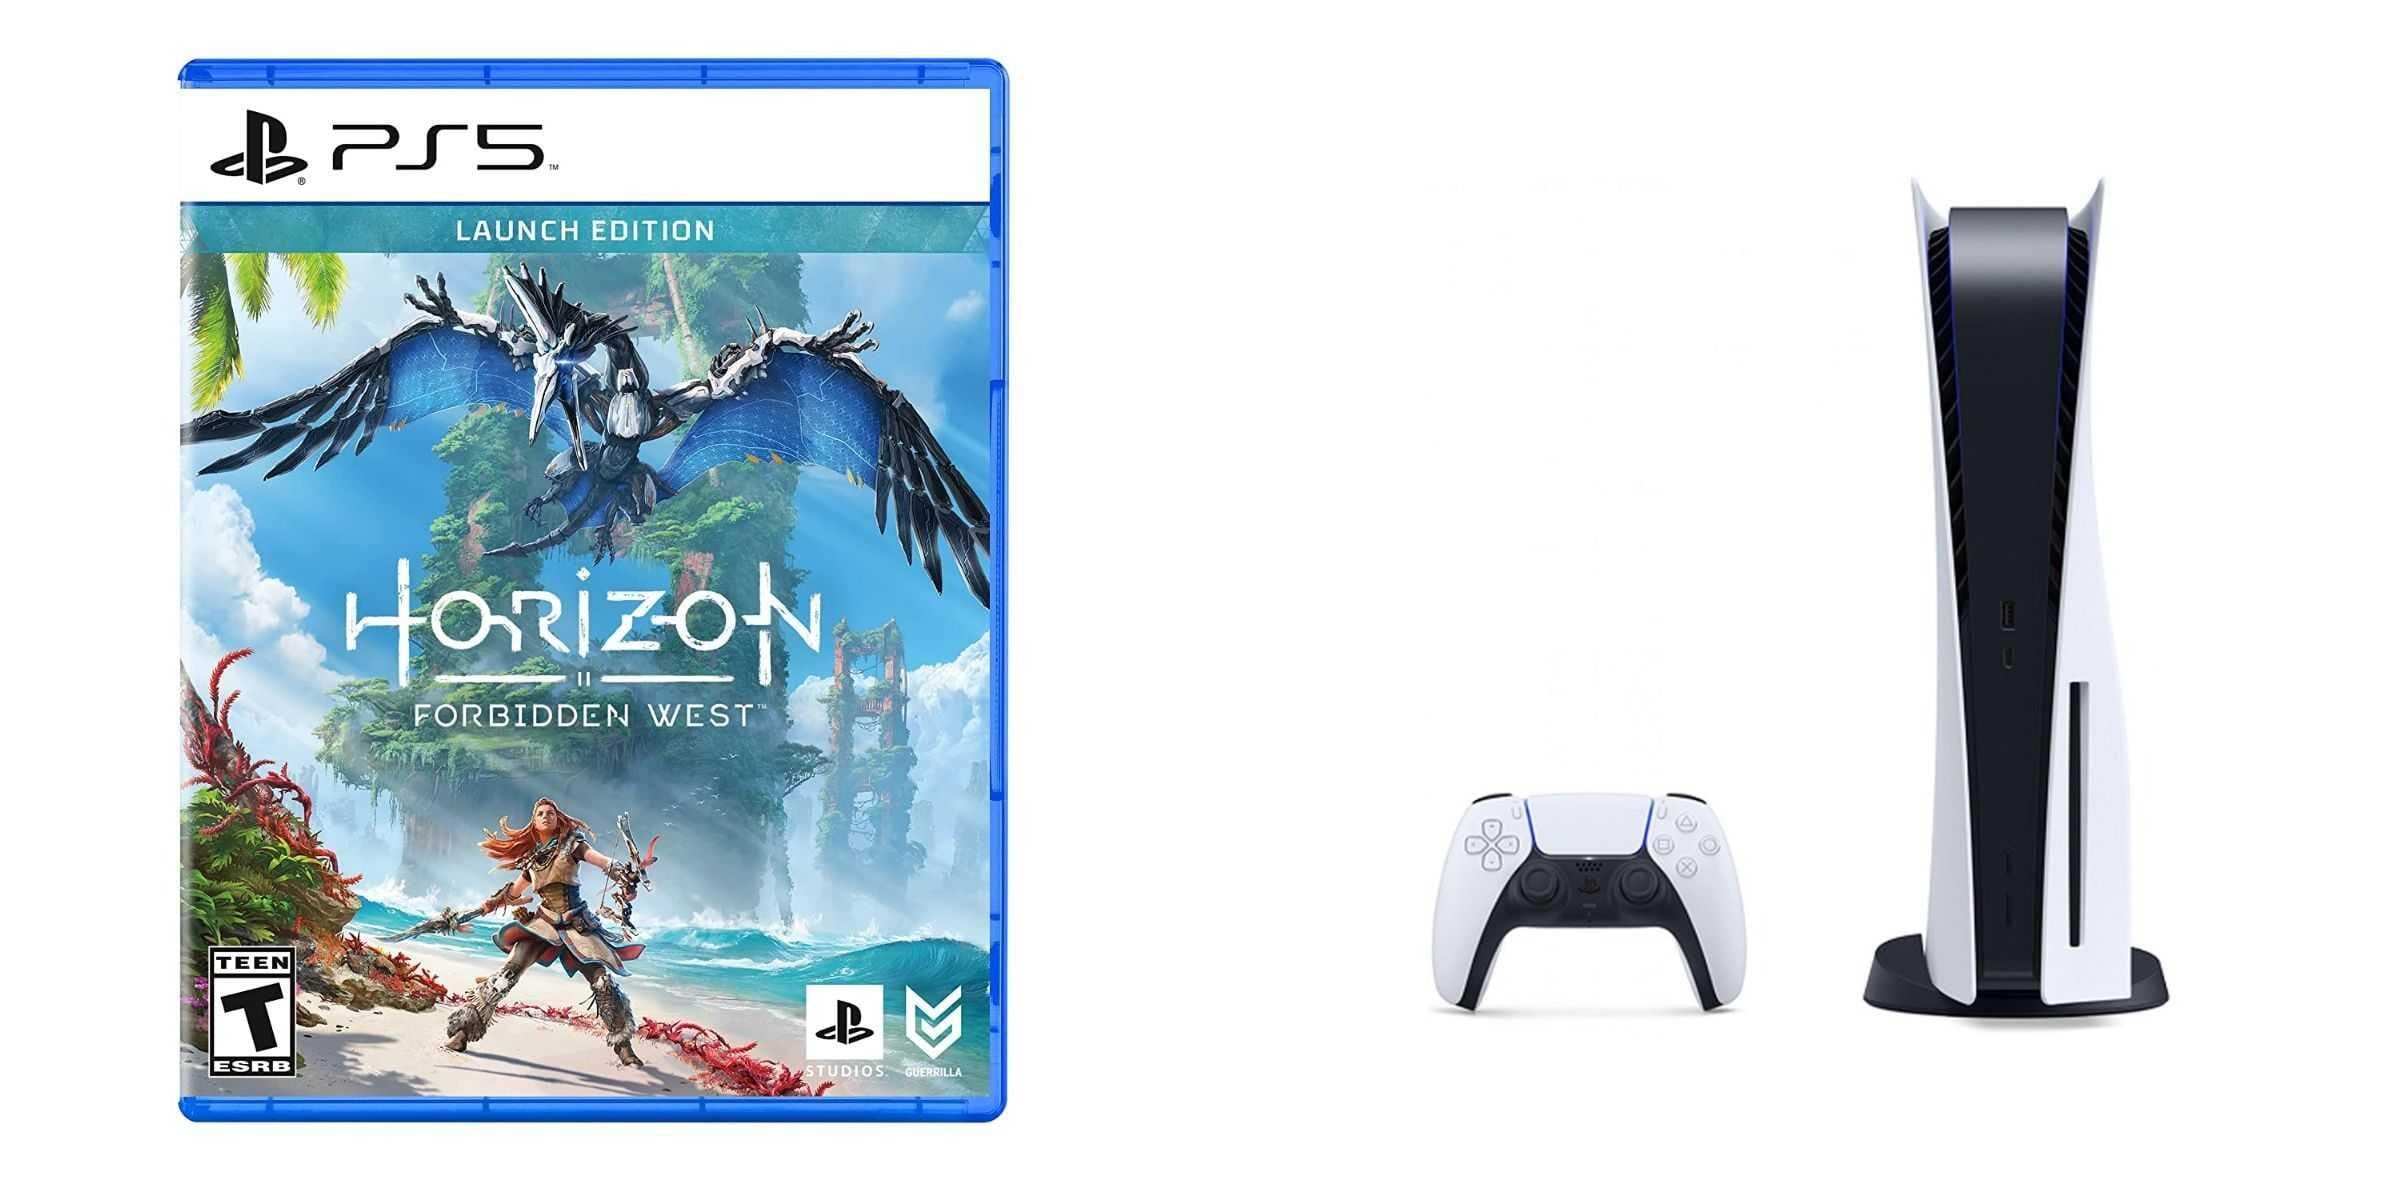 Sony PlayStation 5, 1 Wireless Controller, White - CFI-1016A01 MEE, with Horizon Forbidden West for PlayStation 5